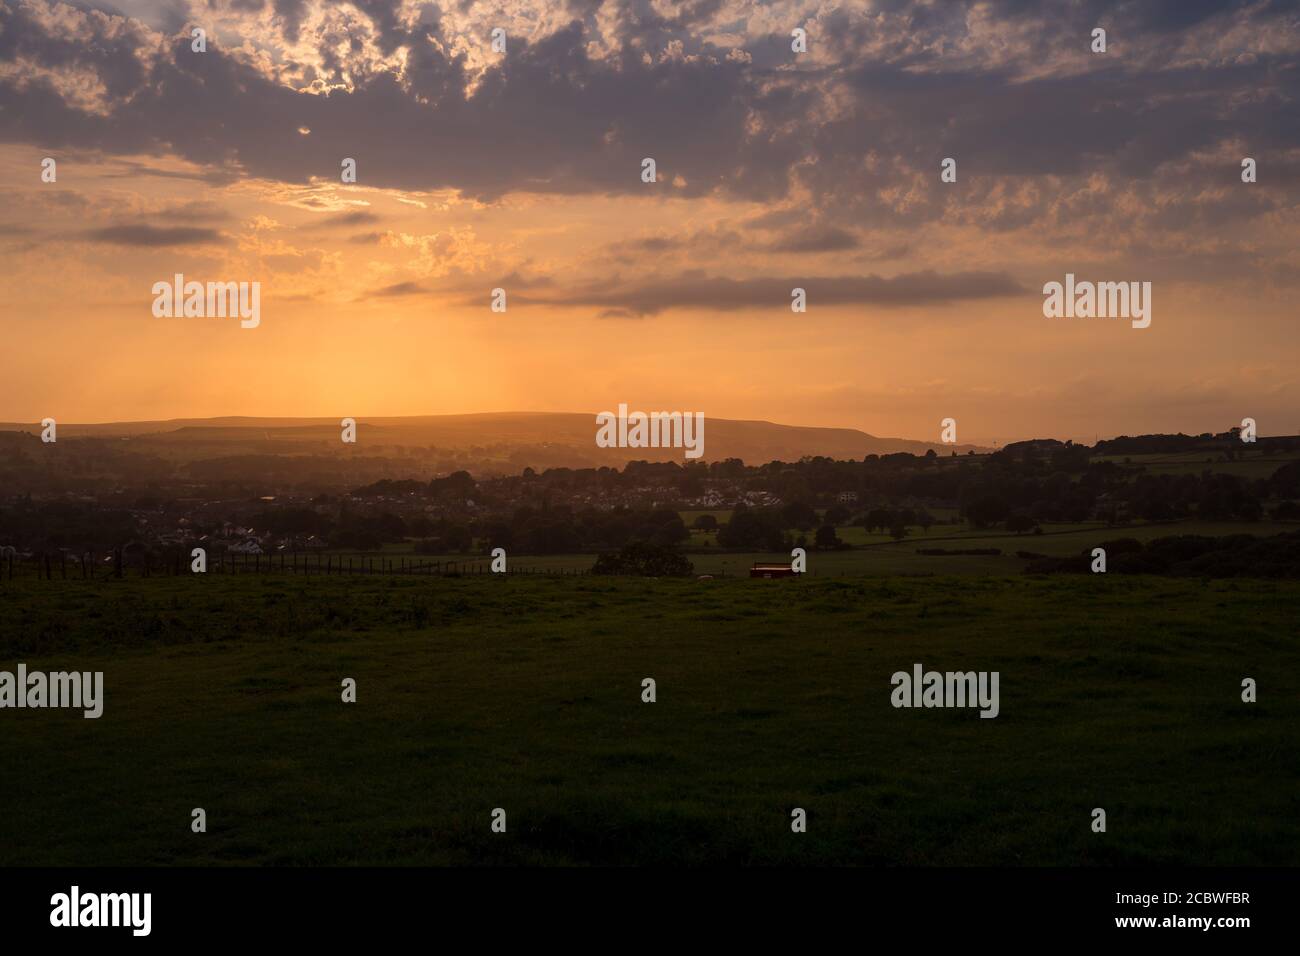 Sunset over countryside Stock Photo